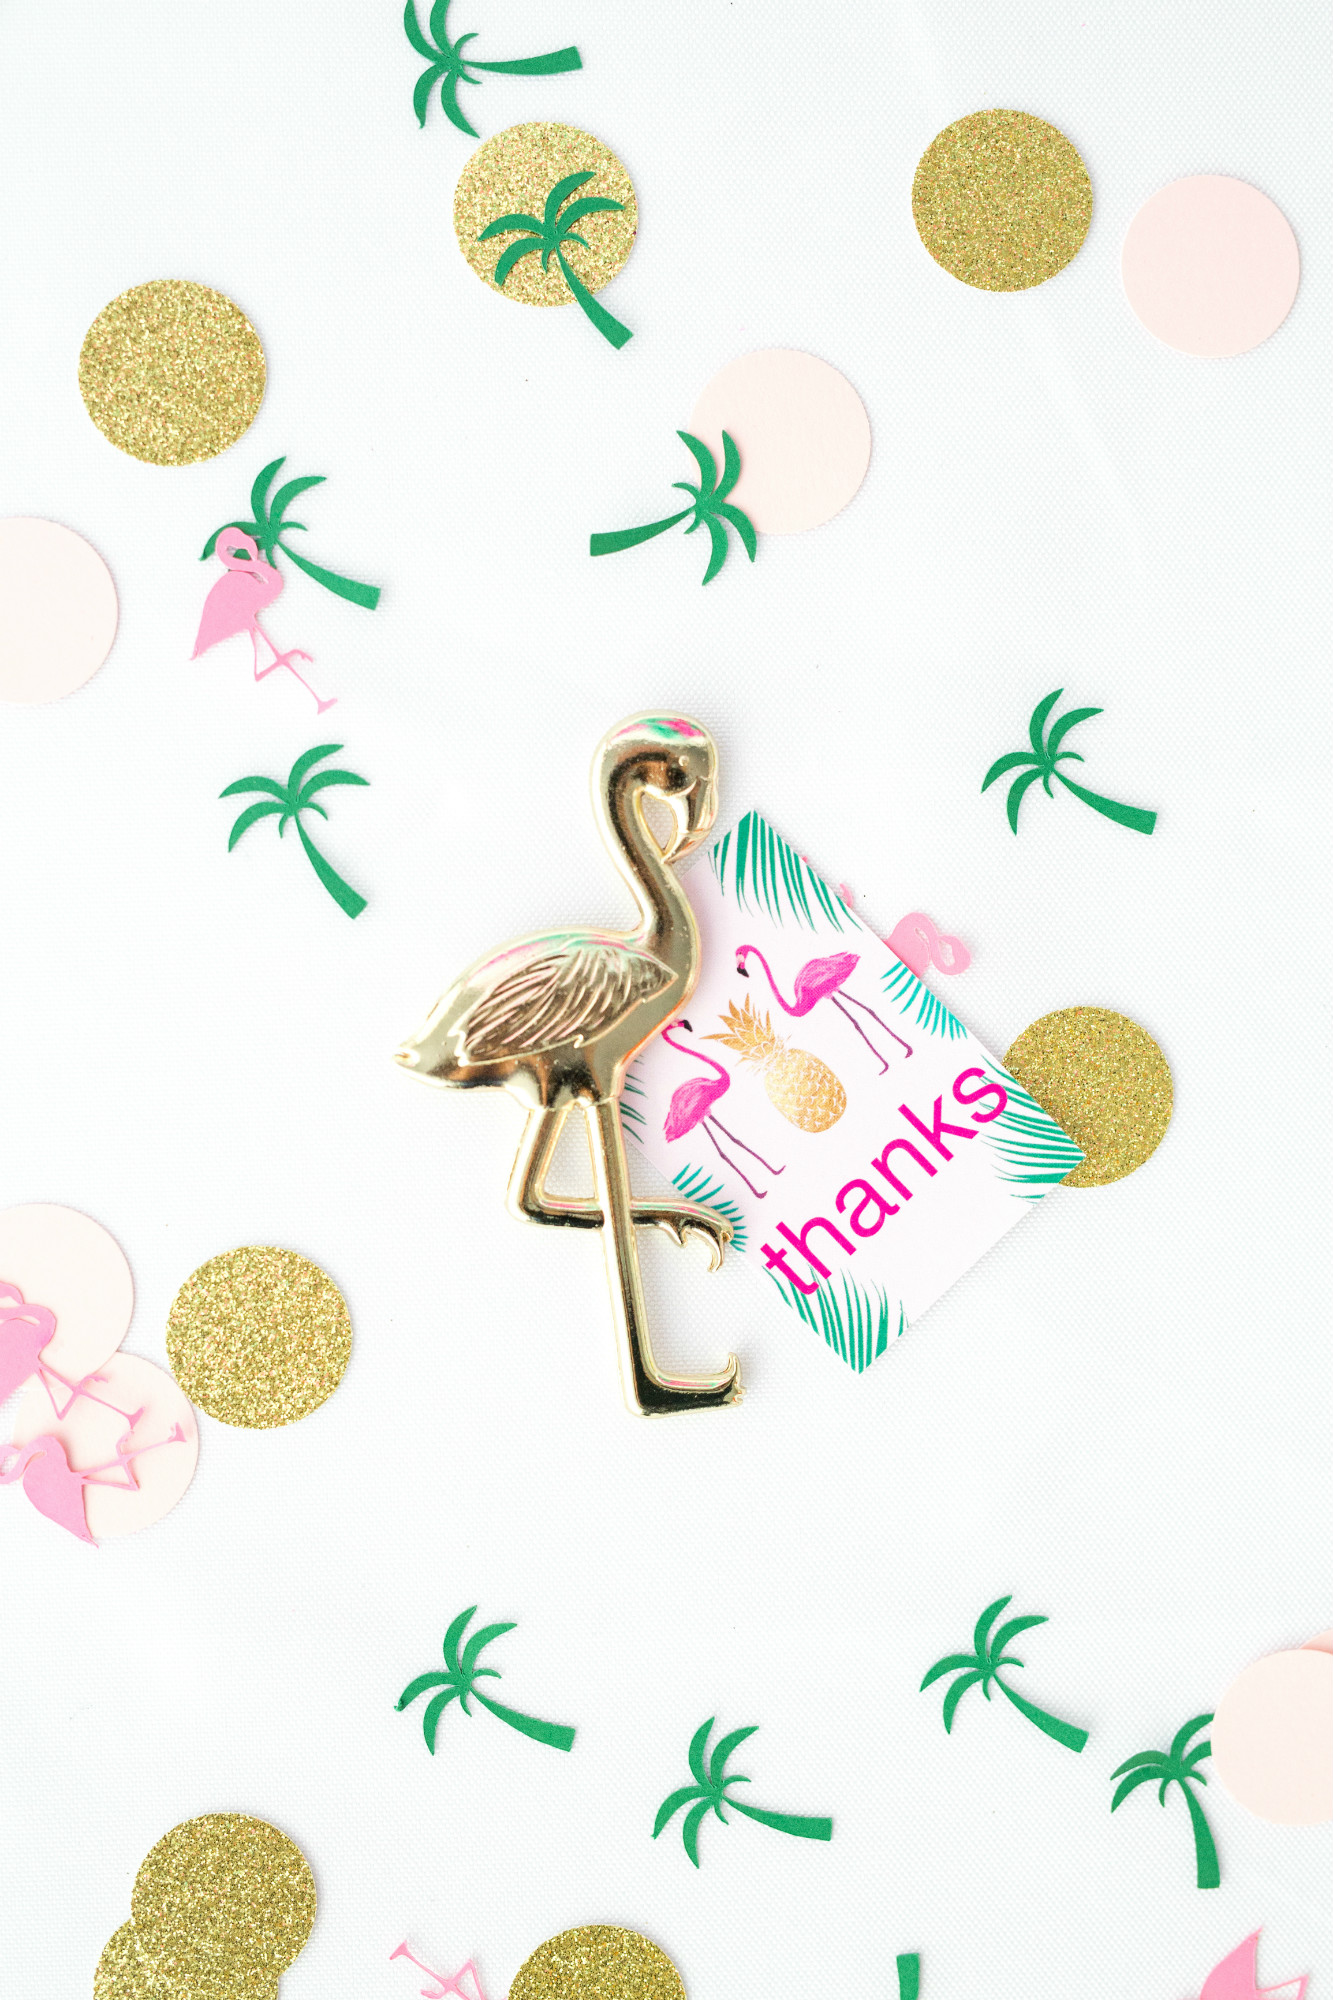 Flamingo Bottle Opener Thank You Favor from Palm Springs Girls Night In featuring Rose Mini Moet Champagne| Black Twine